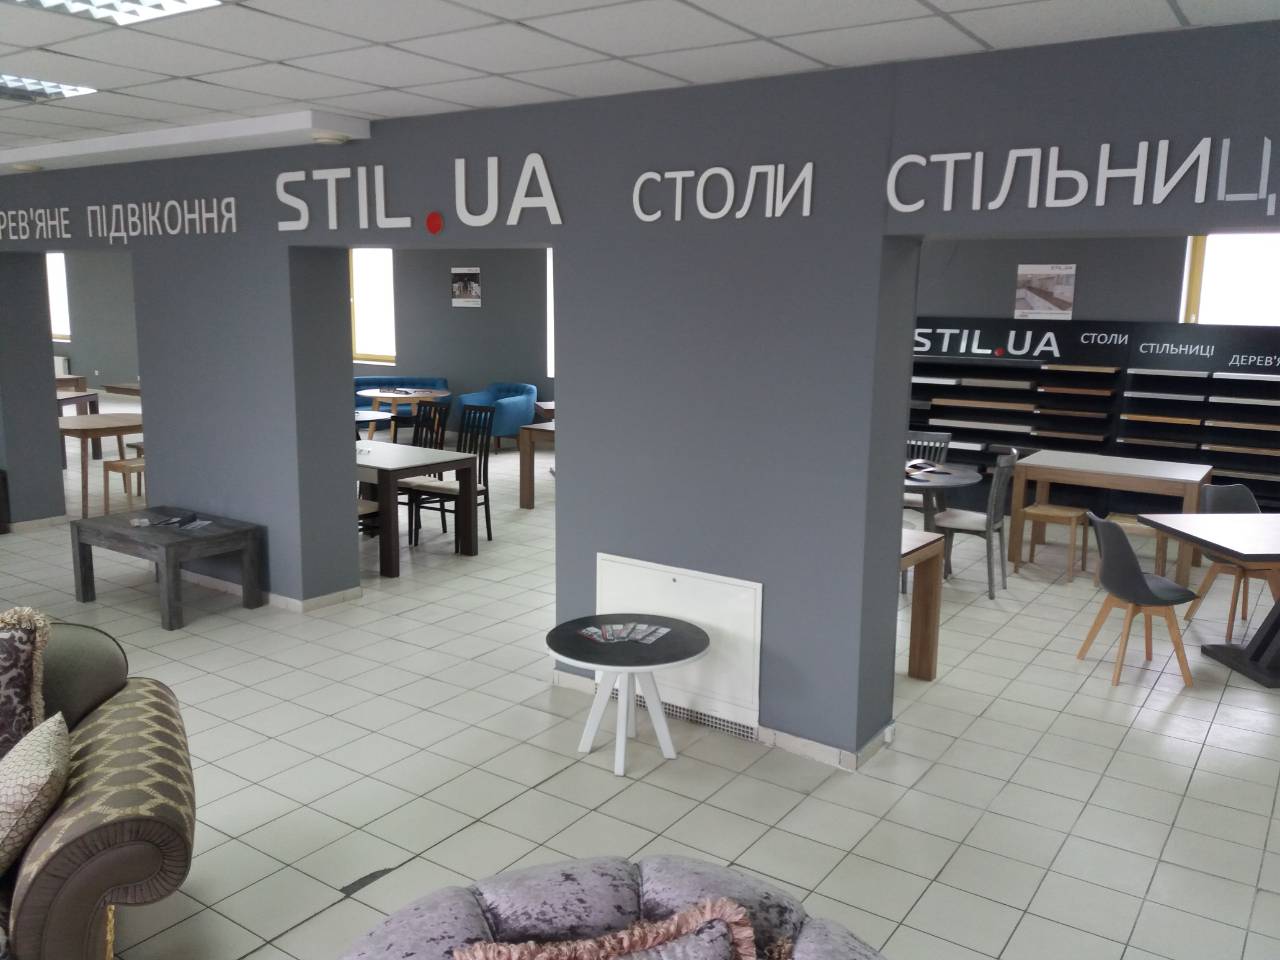 OPENING OF A NEW SHOW ROOM in Ivano-Frankivsk